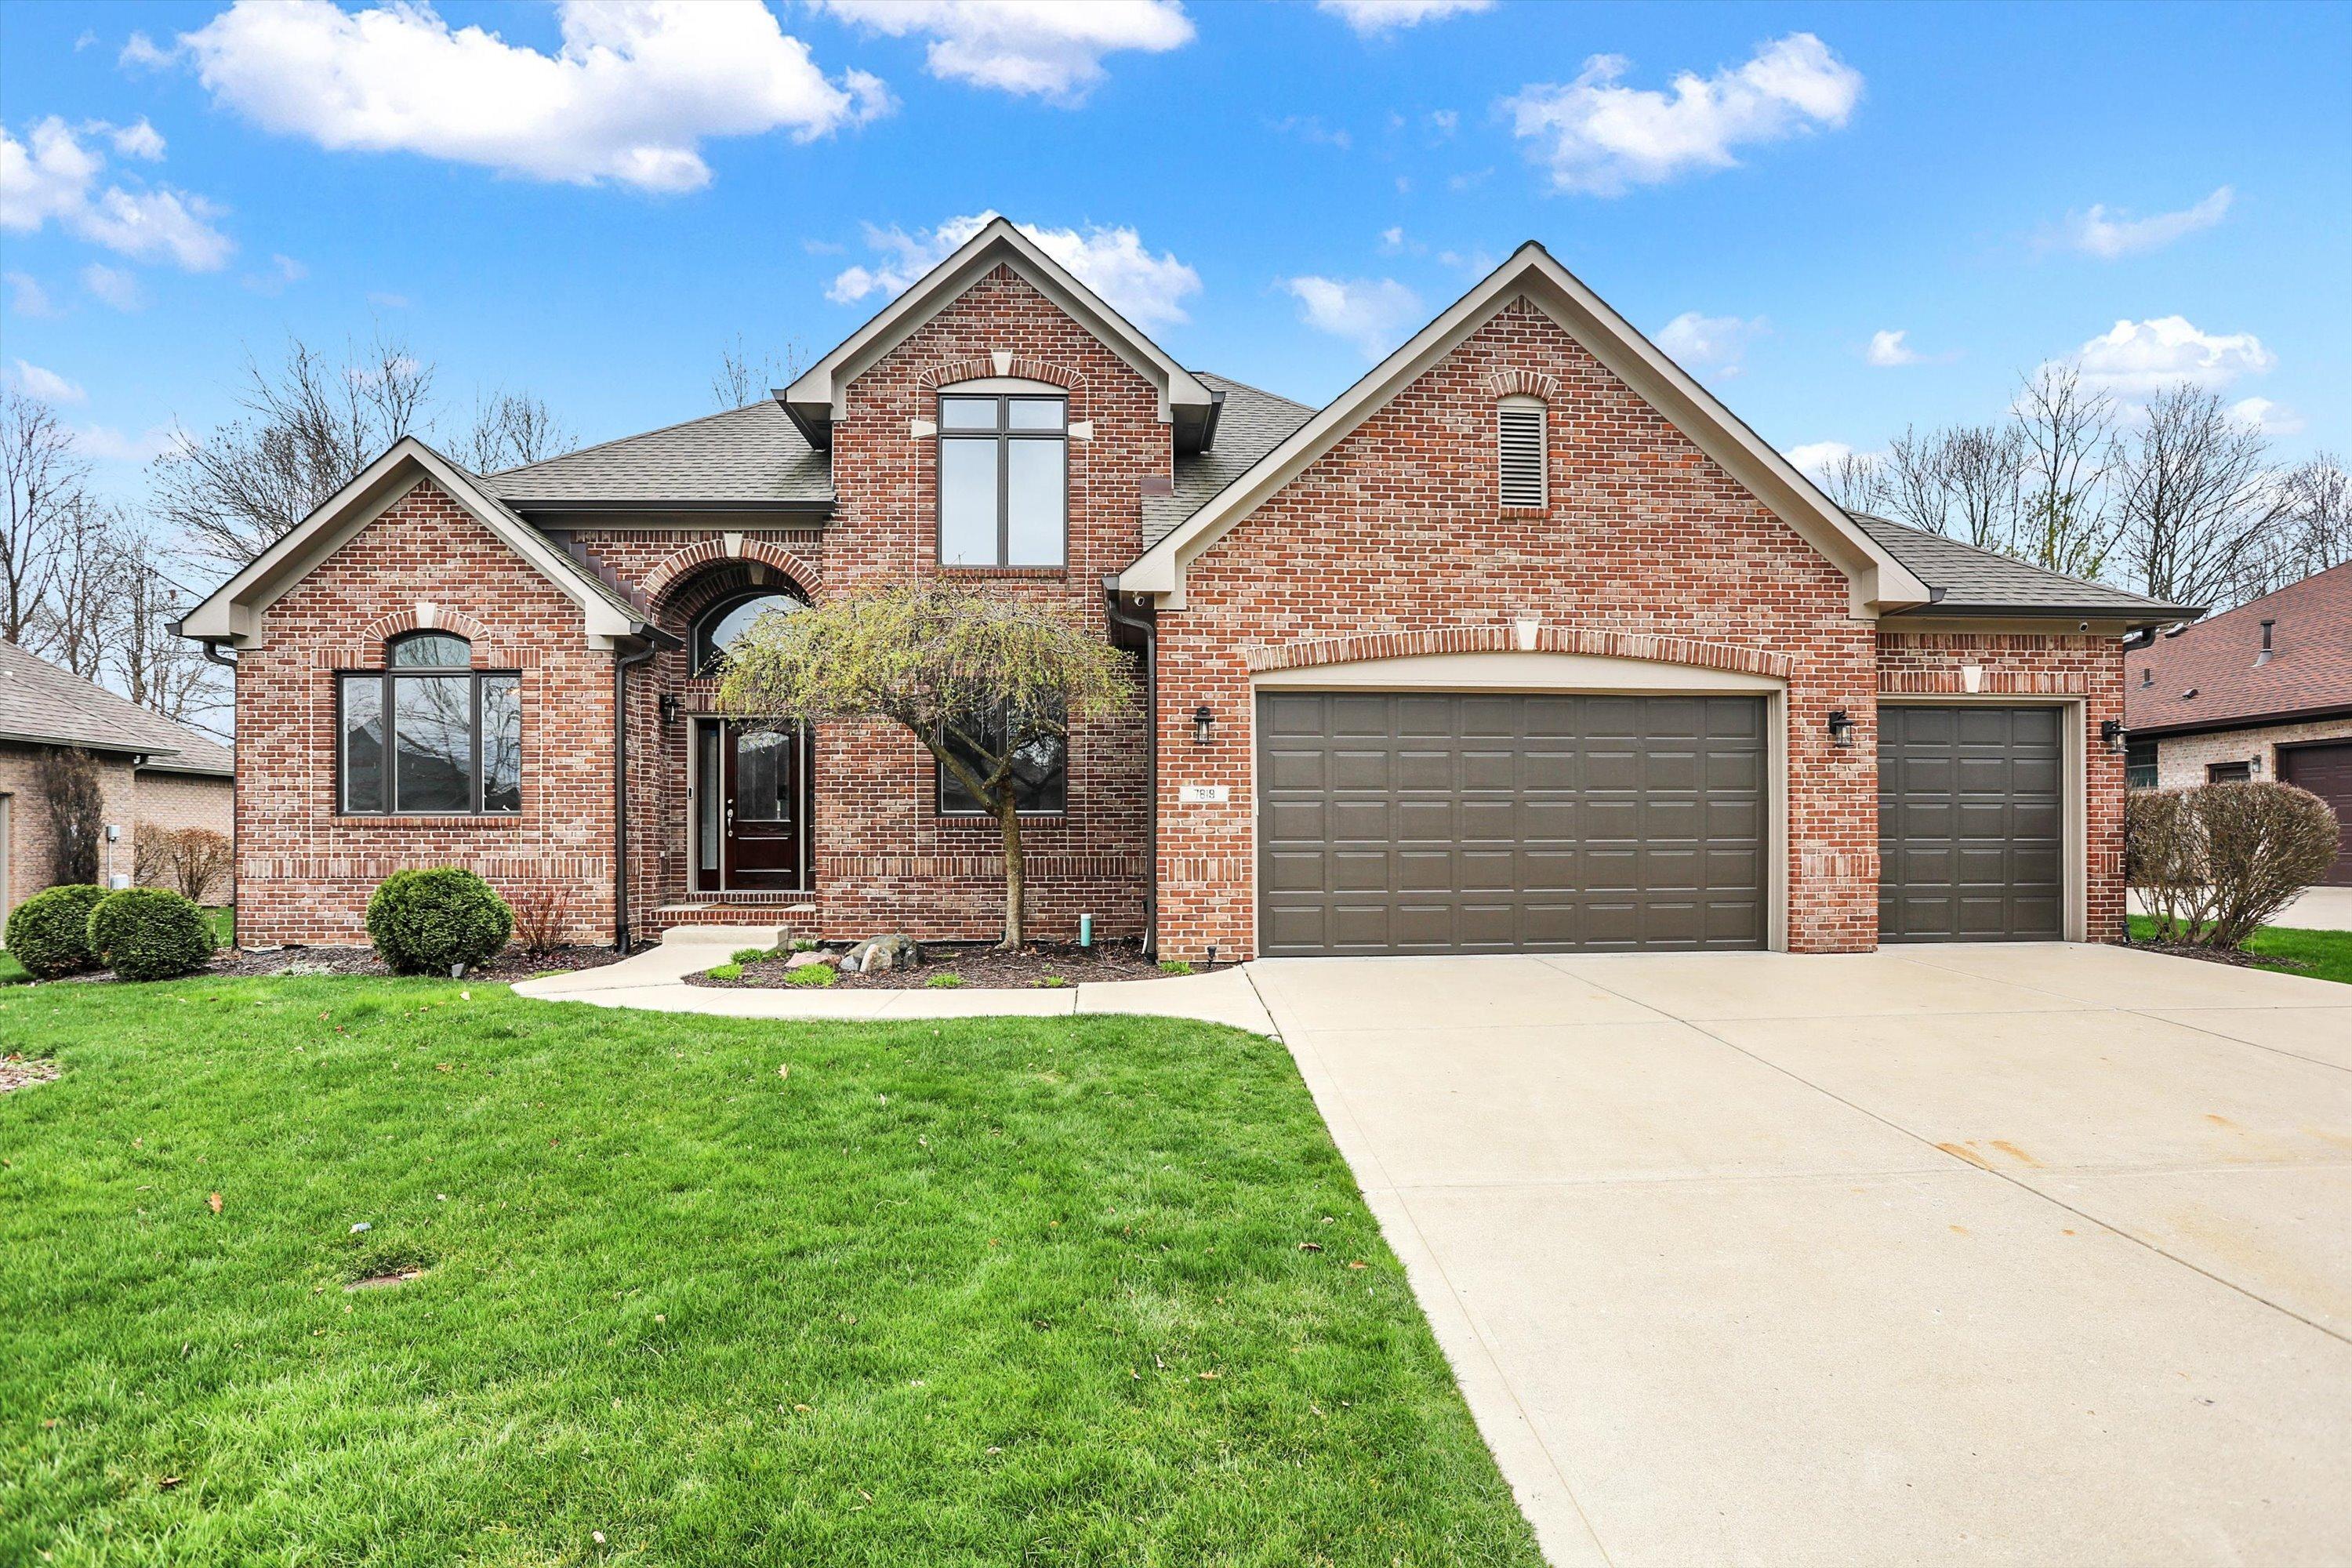 Photo one of 7819 Broadmead Way Indianapolis IN 46259 | MLS 21971096